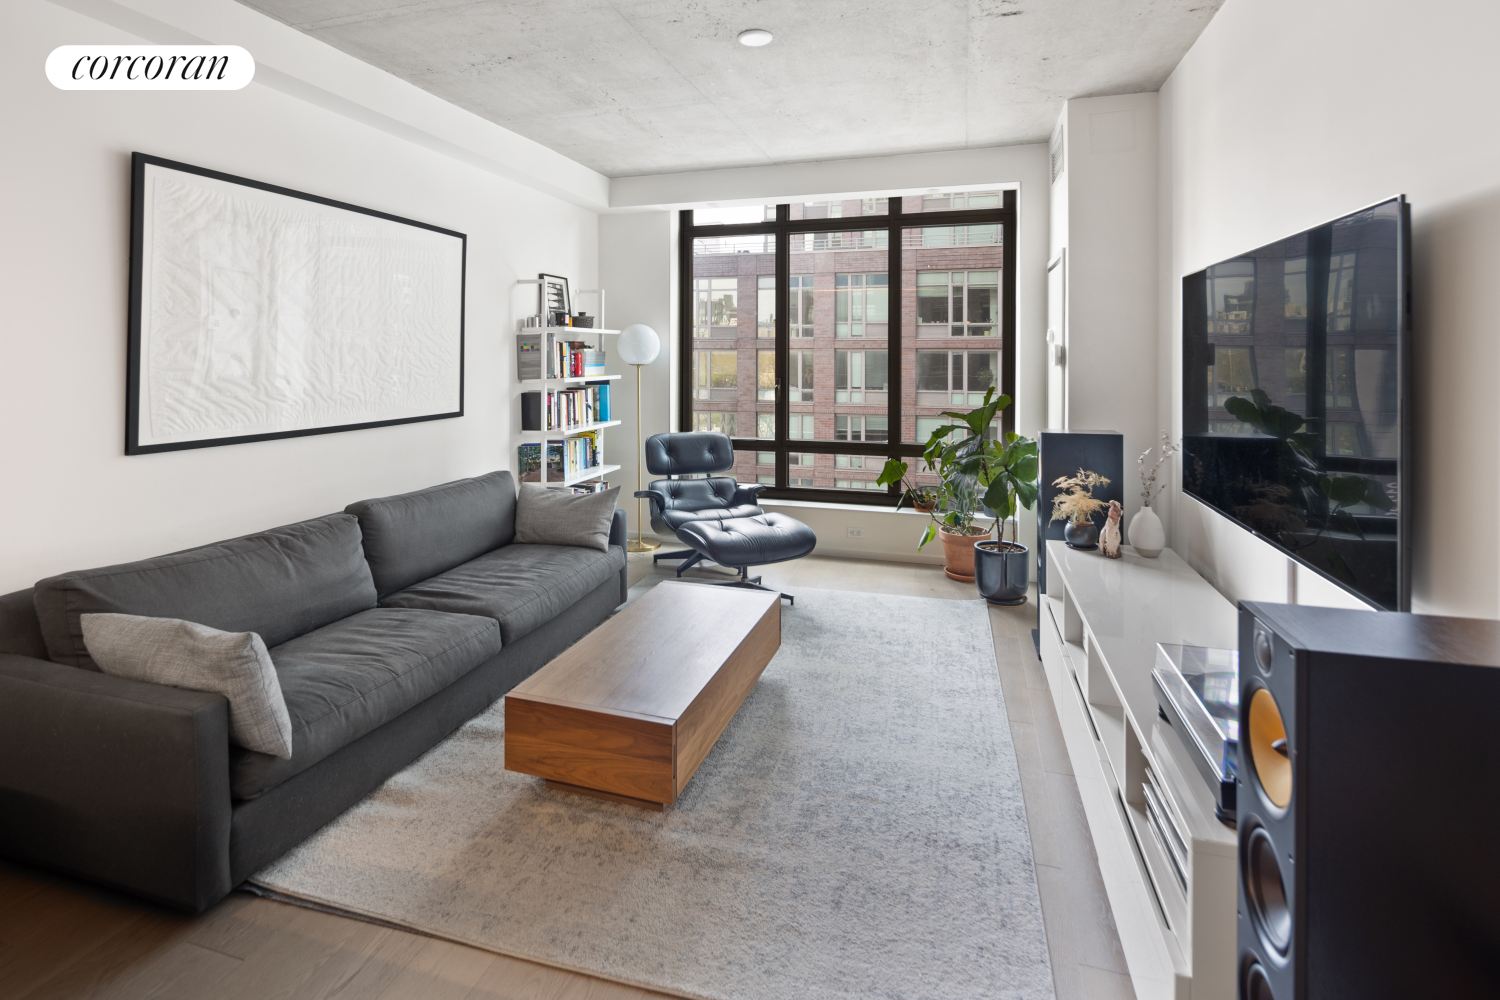 196 Orchard Street 4C, Lower East Side, Downtown, NYC - 1 Bedrooms  
1 Bathrooms  
3 Rooms - 